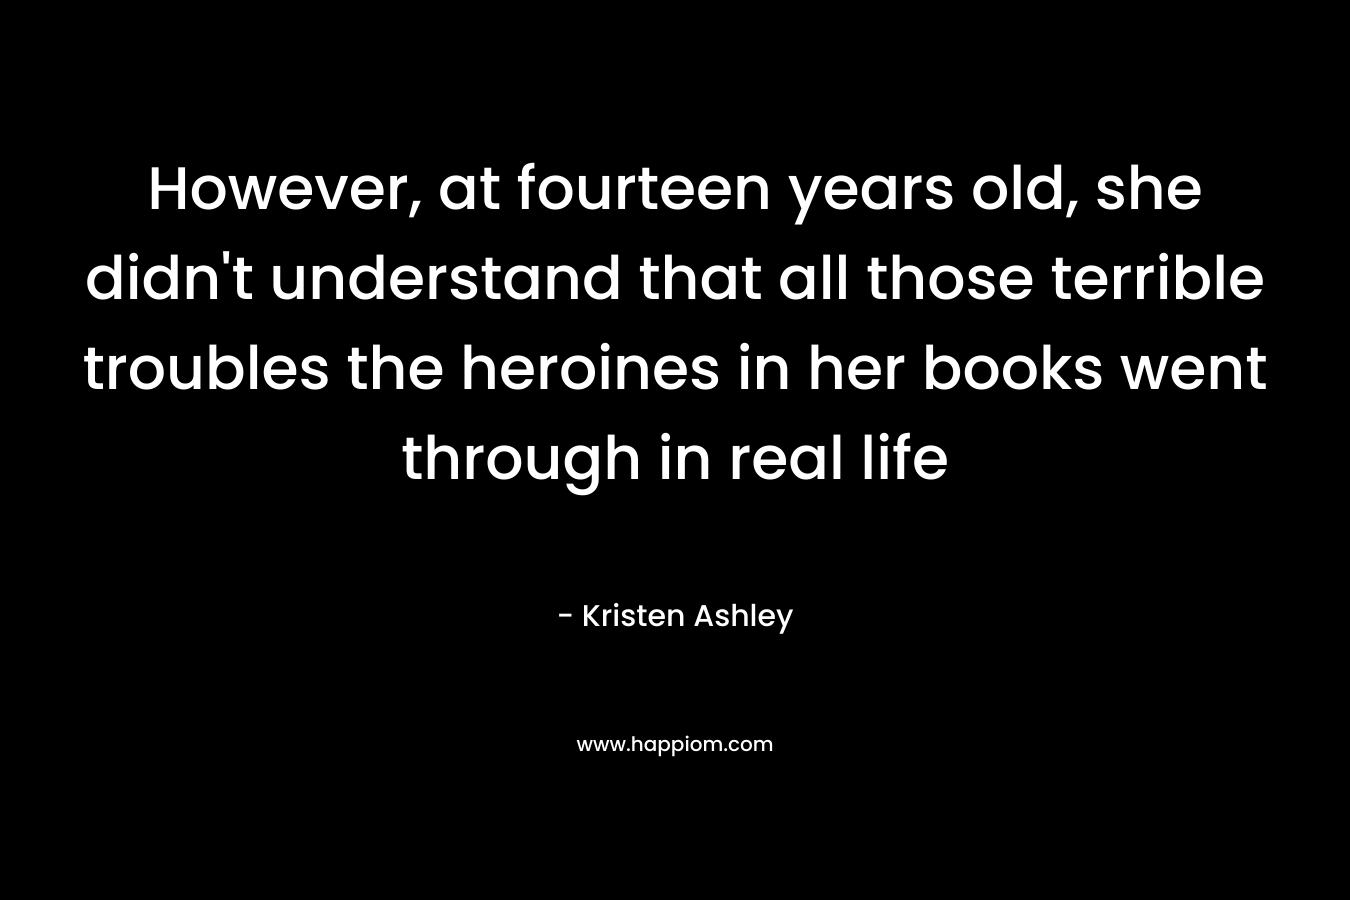 However, at fourteen years old, she didn’t understand that all those terrible troubles the heroines in her books went through in real life – Kristen Ashley